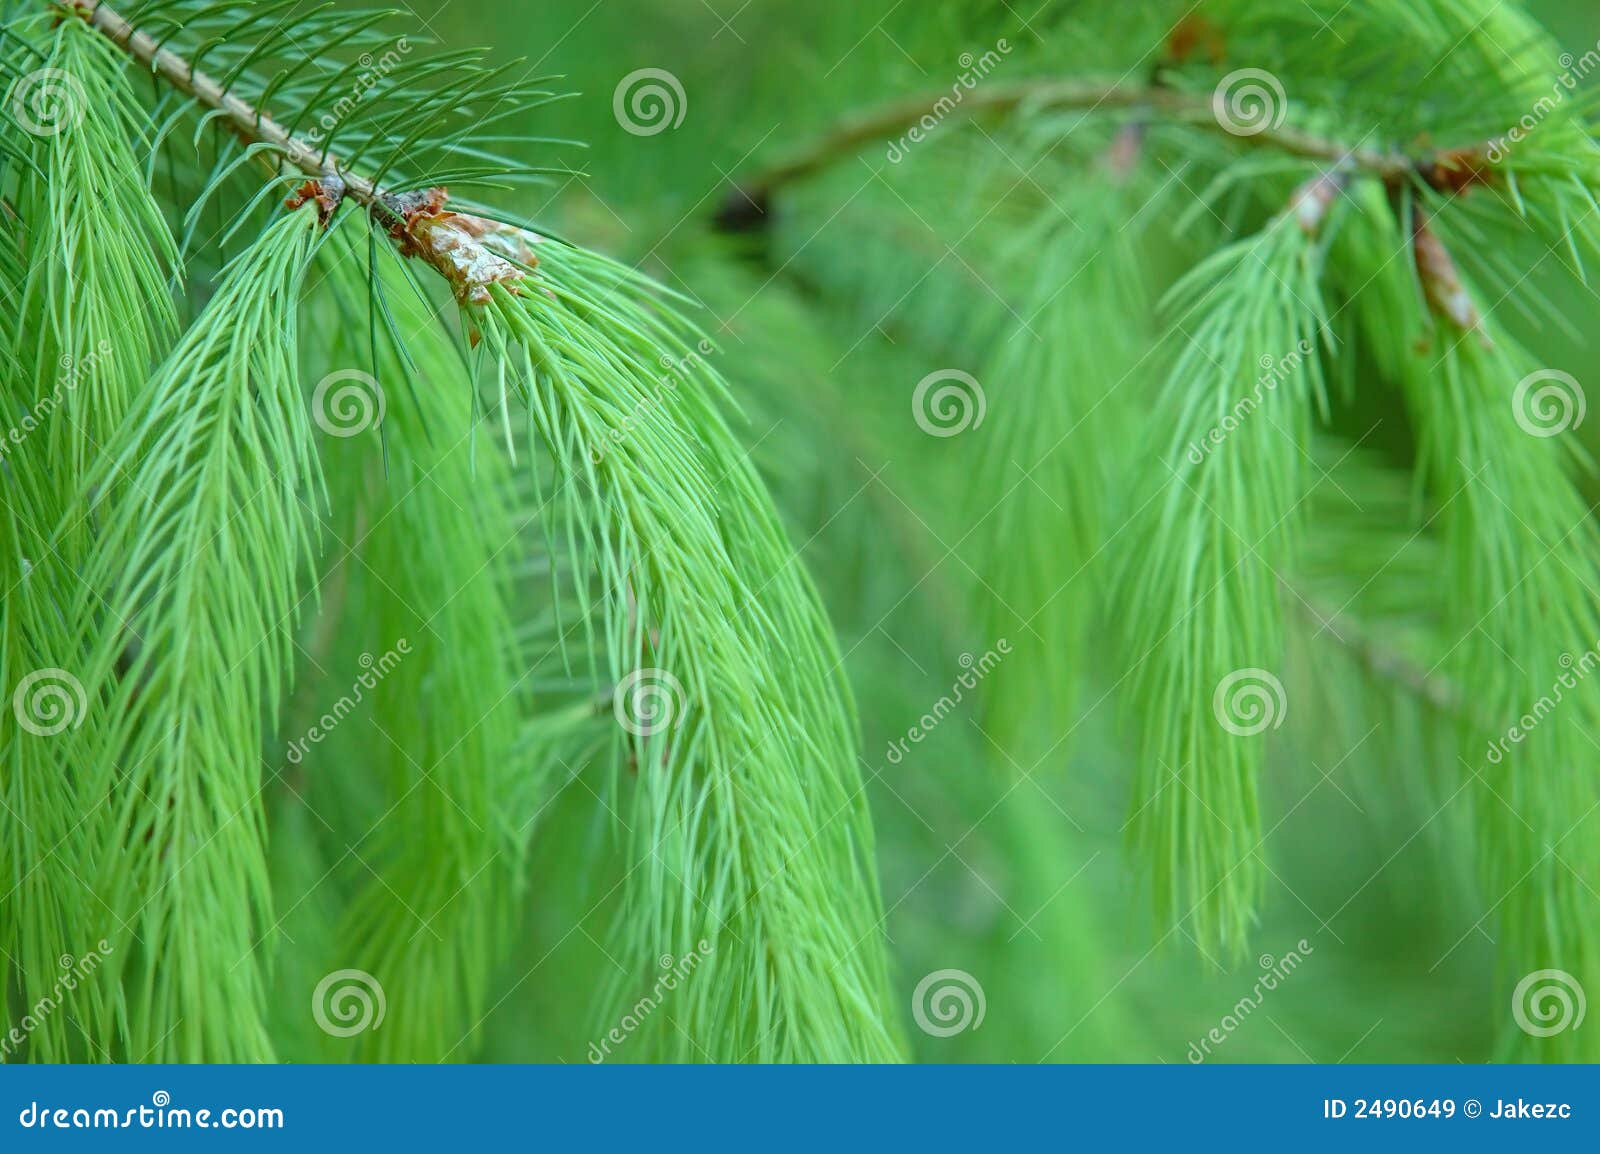 Green Pine Needles Close Up Stock Image   Image of cone ...